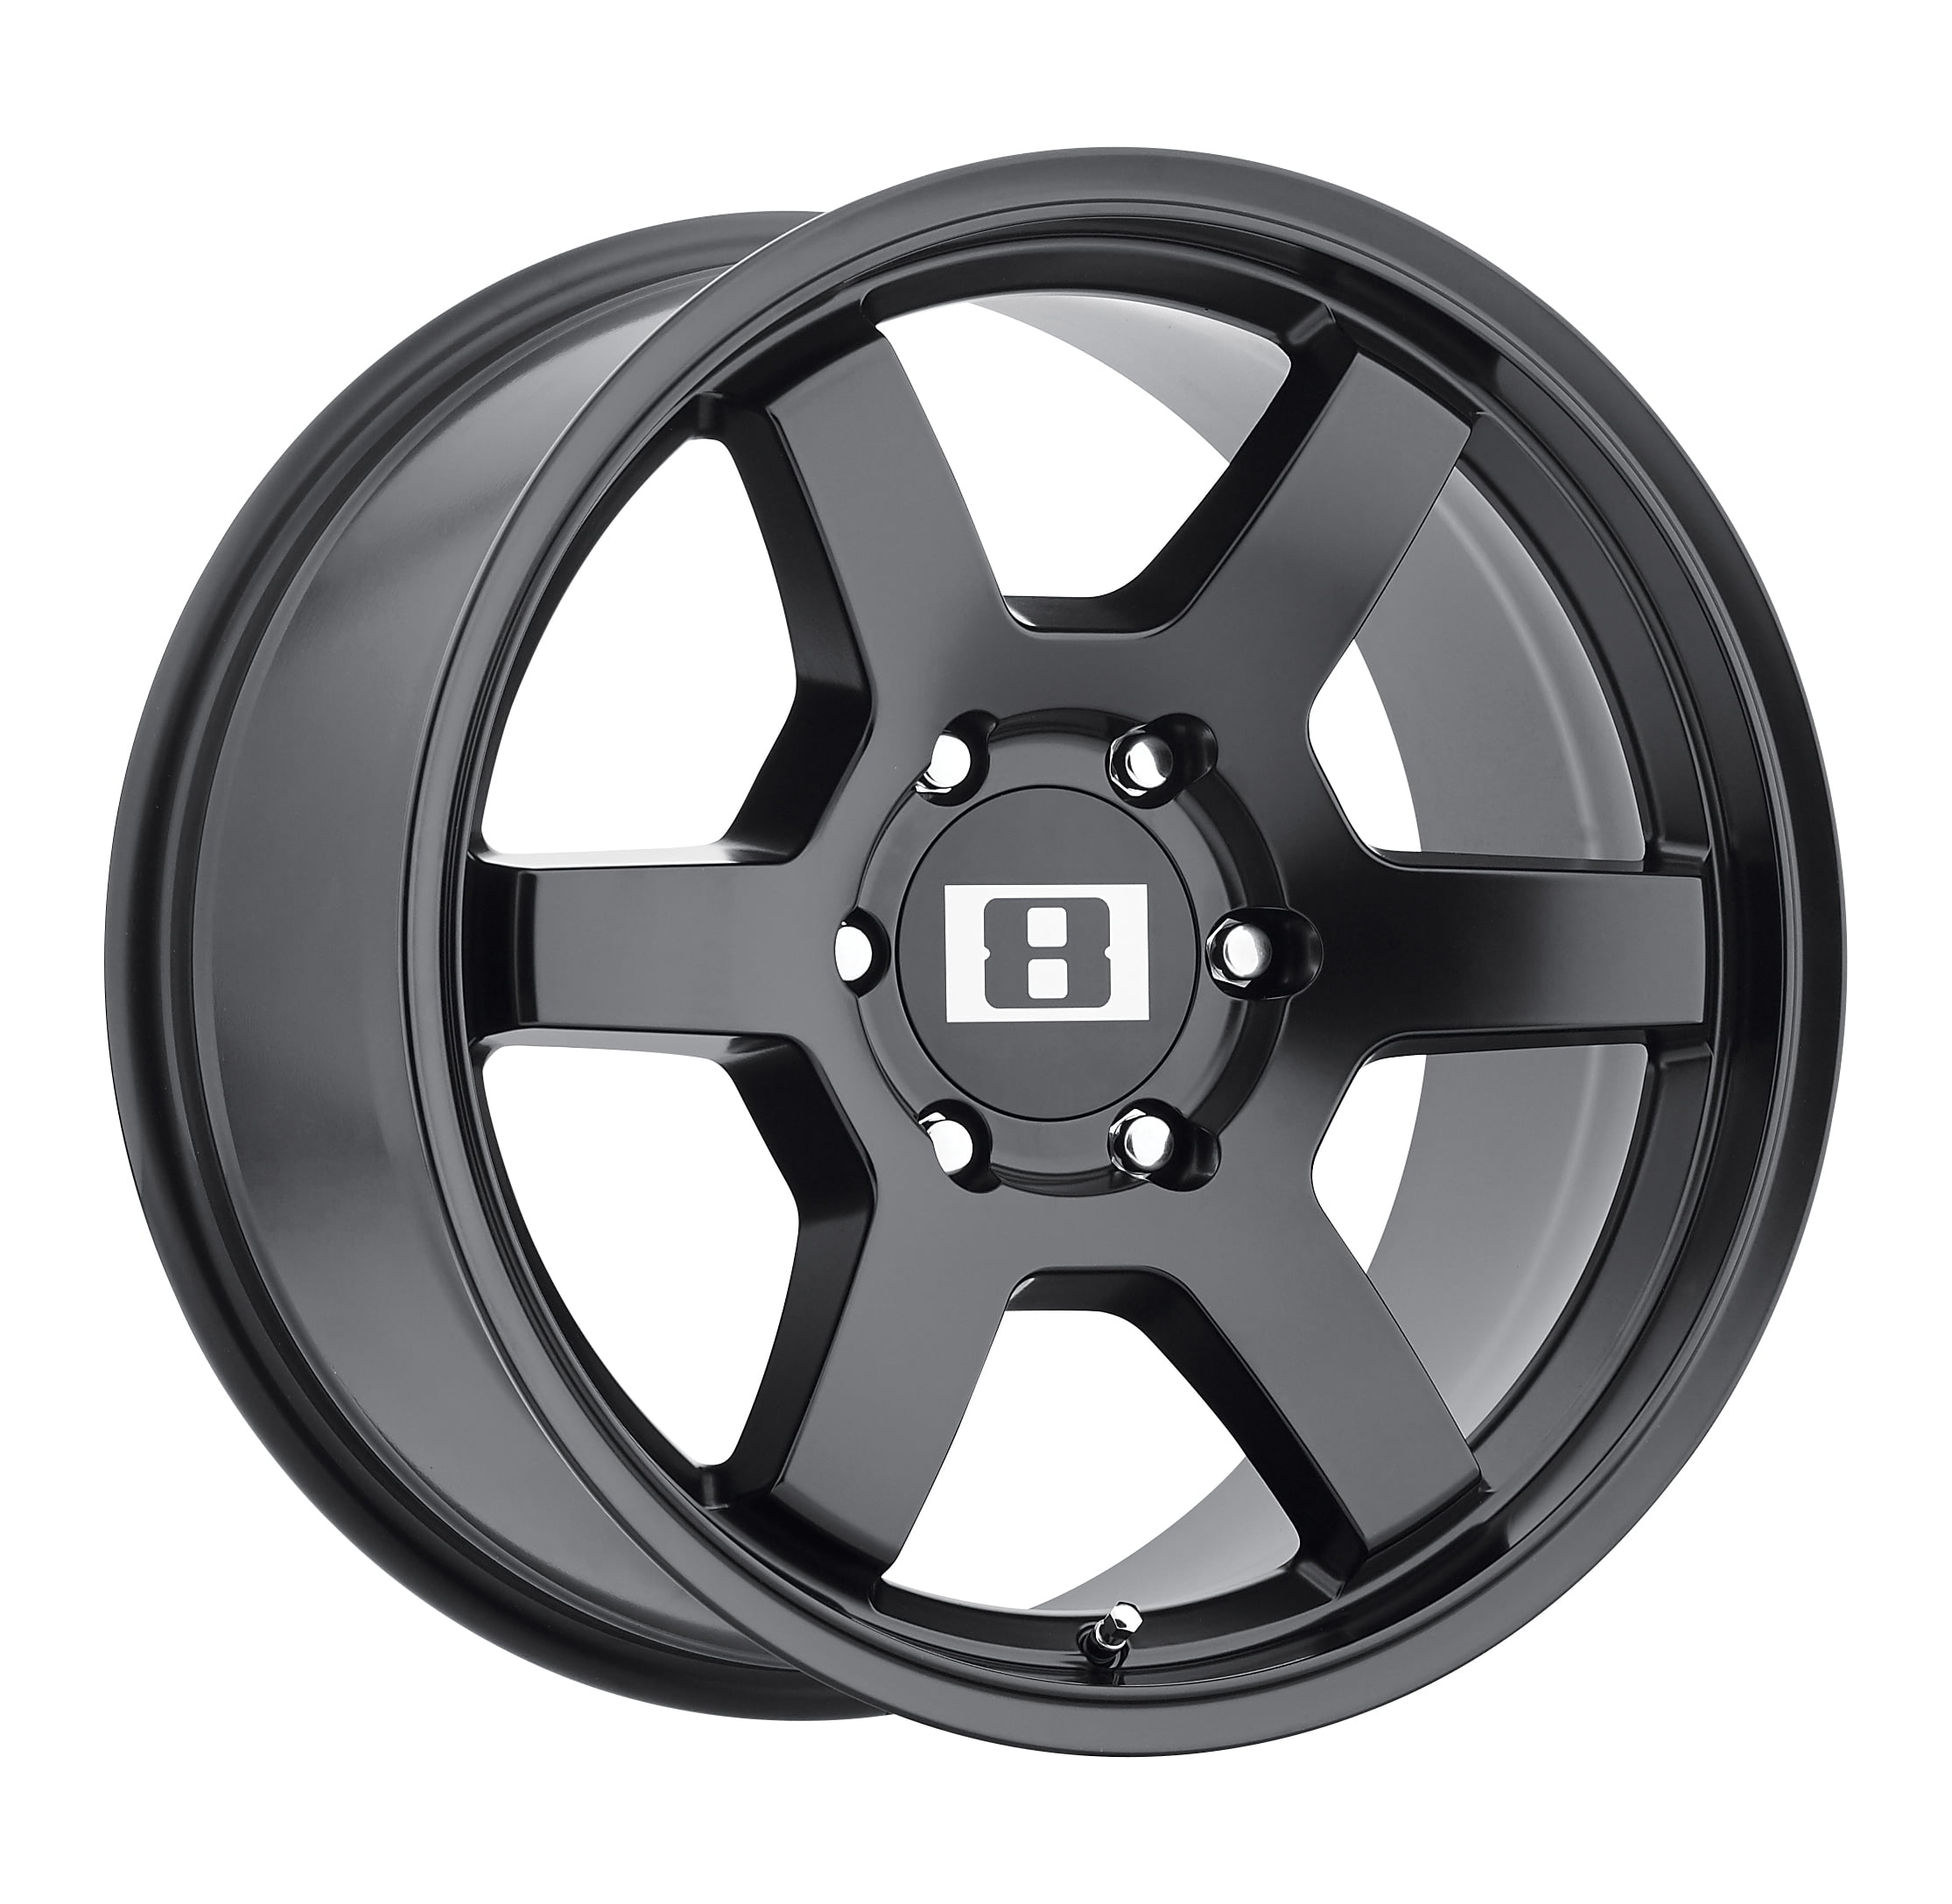 LEVEL 8 Impact Matte Black Wheel with Painted Finish 20 x 9 inches /6x139.7 mm, 9 mm Offset